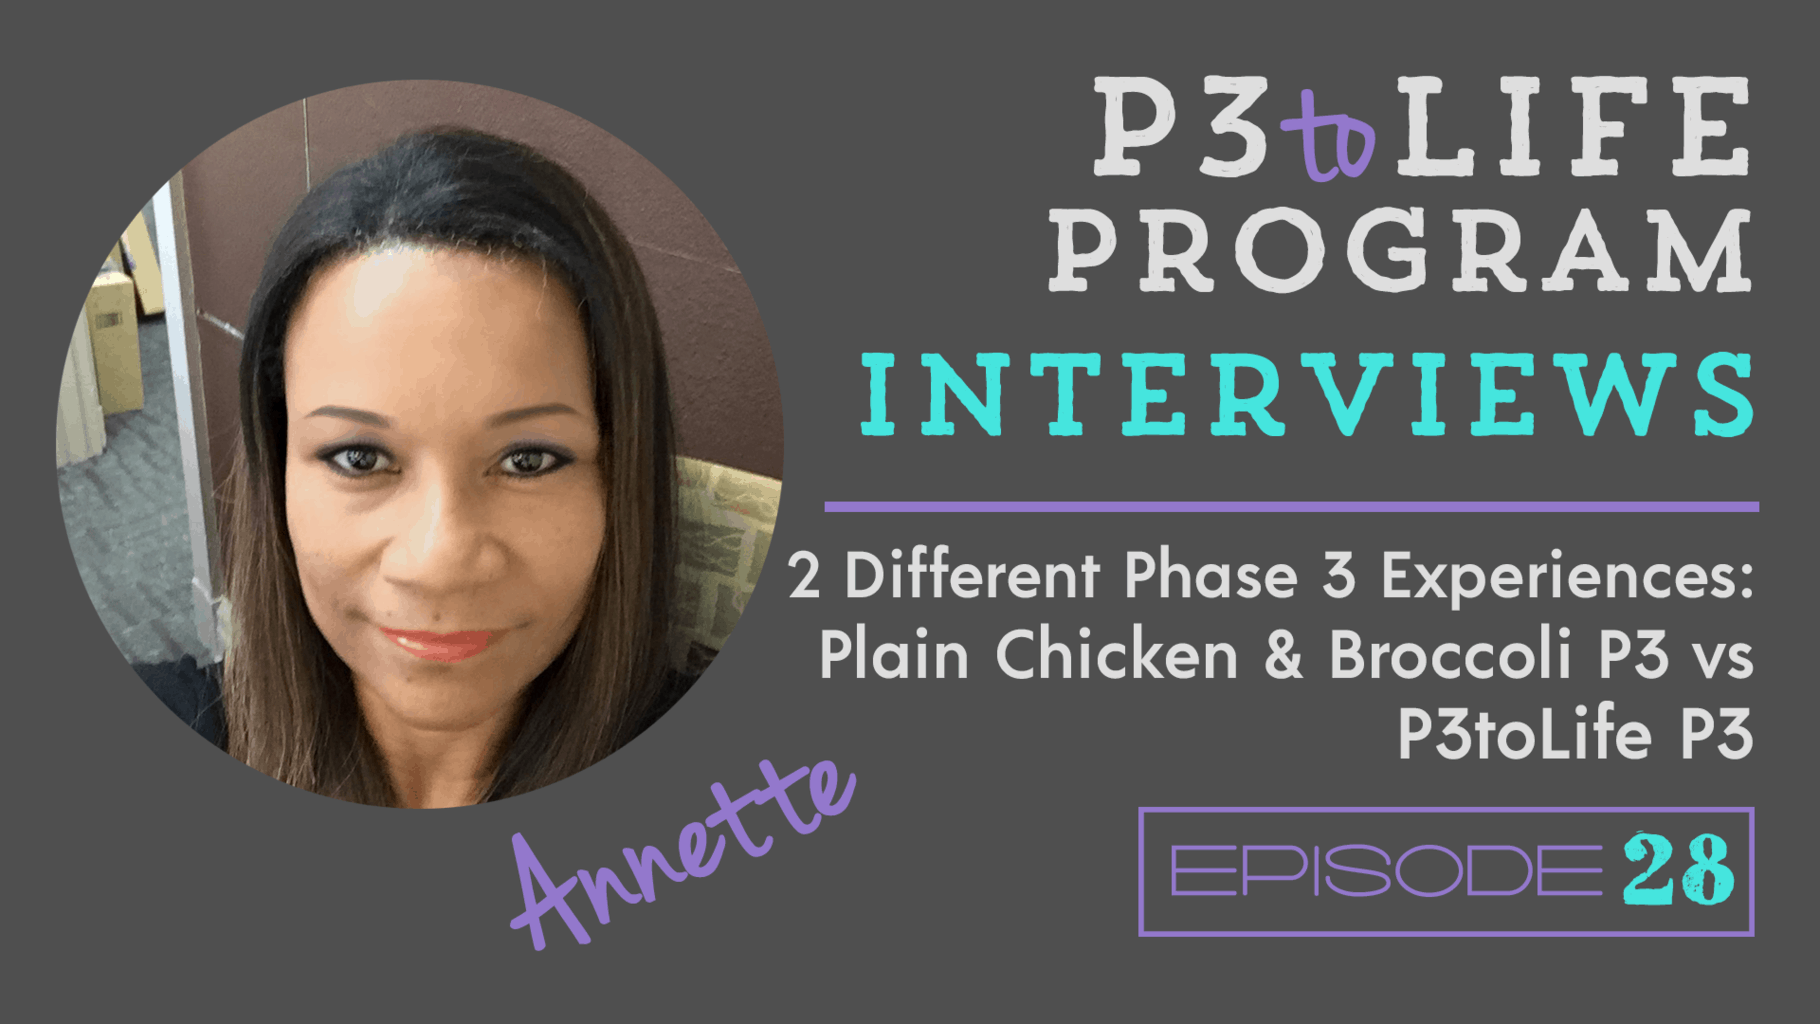 p3tolife-vs-plain-chicken-broccoli-different-phase-3-experience-episode-28-annette